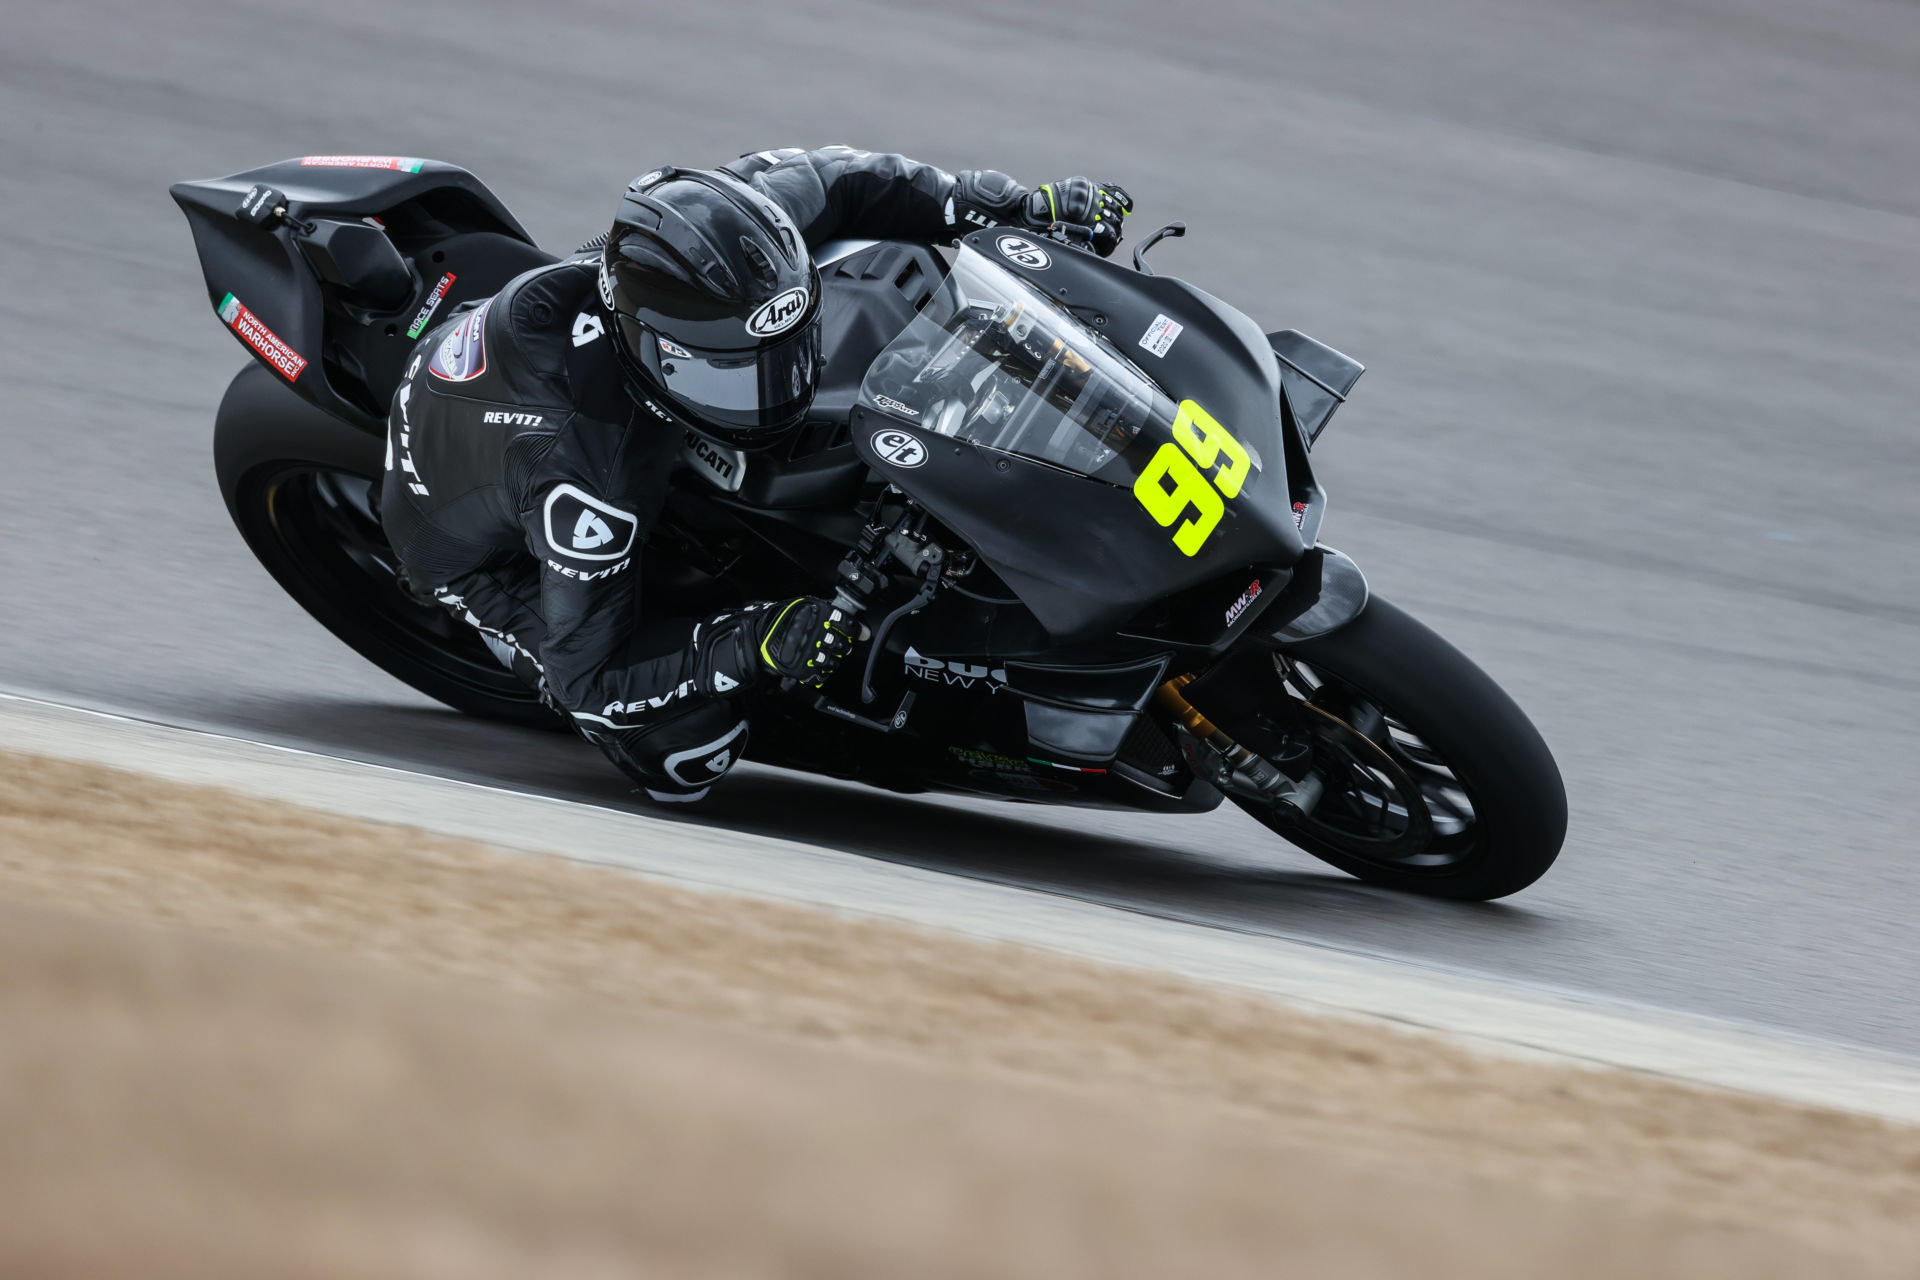 PJ Jacobsen (99) on his Celtic HSBK Racing Ducati Panigale V4 R during the MotoAmerica pre-season test at Barber Motorsports Park. Photo by Brian J. Nelson.